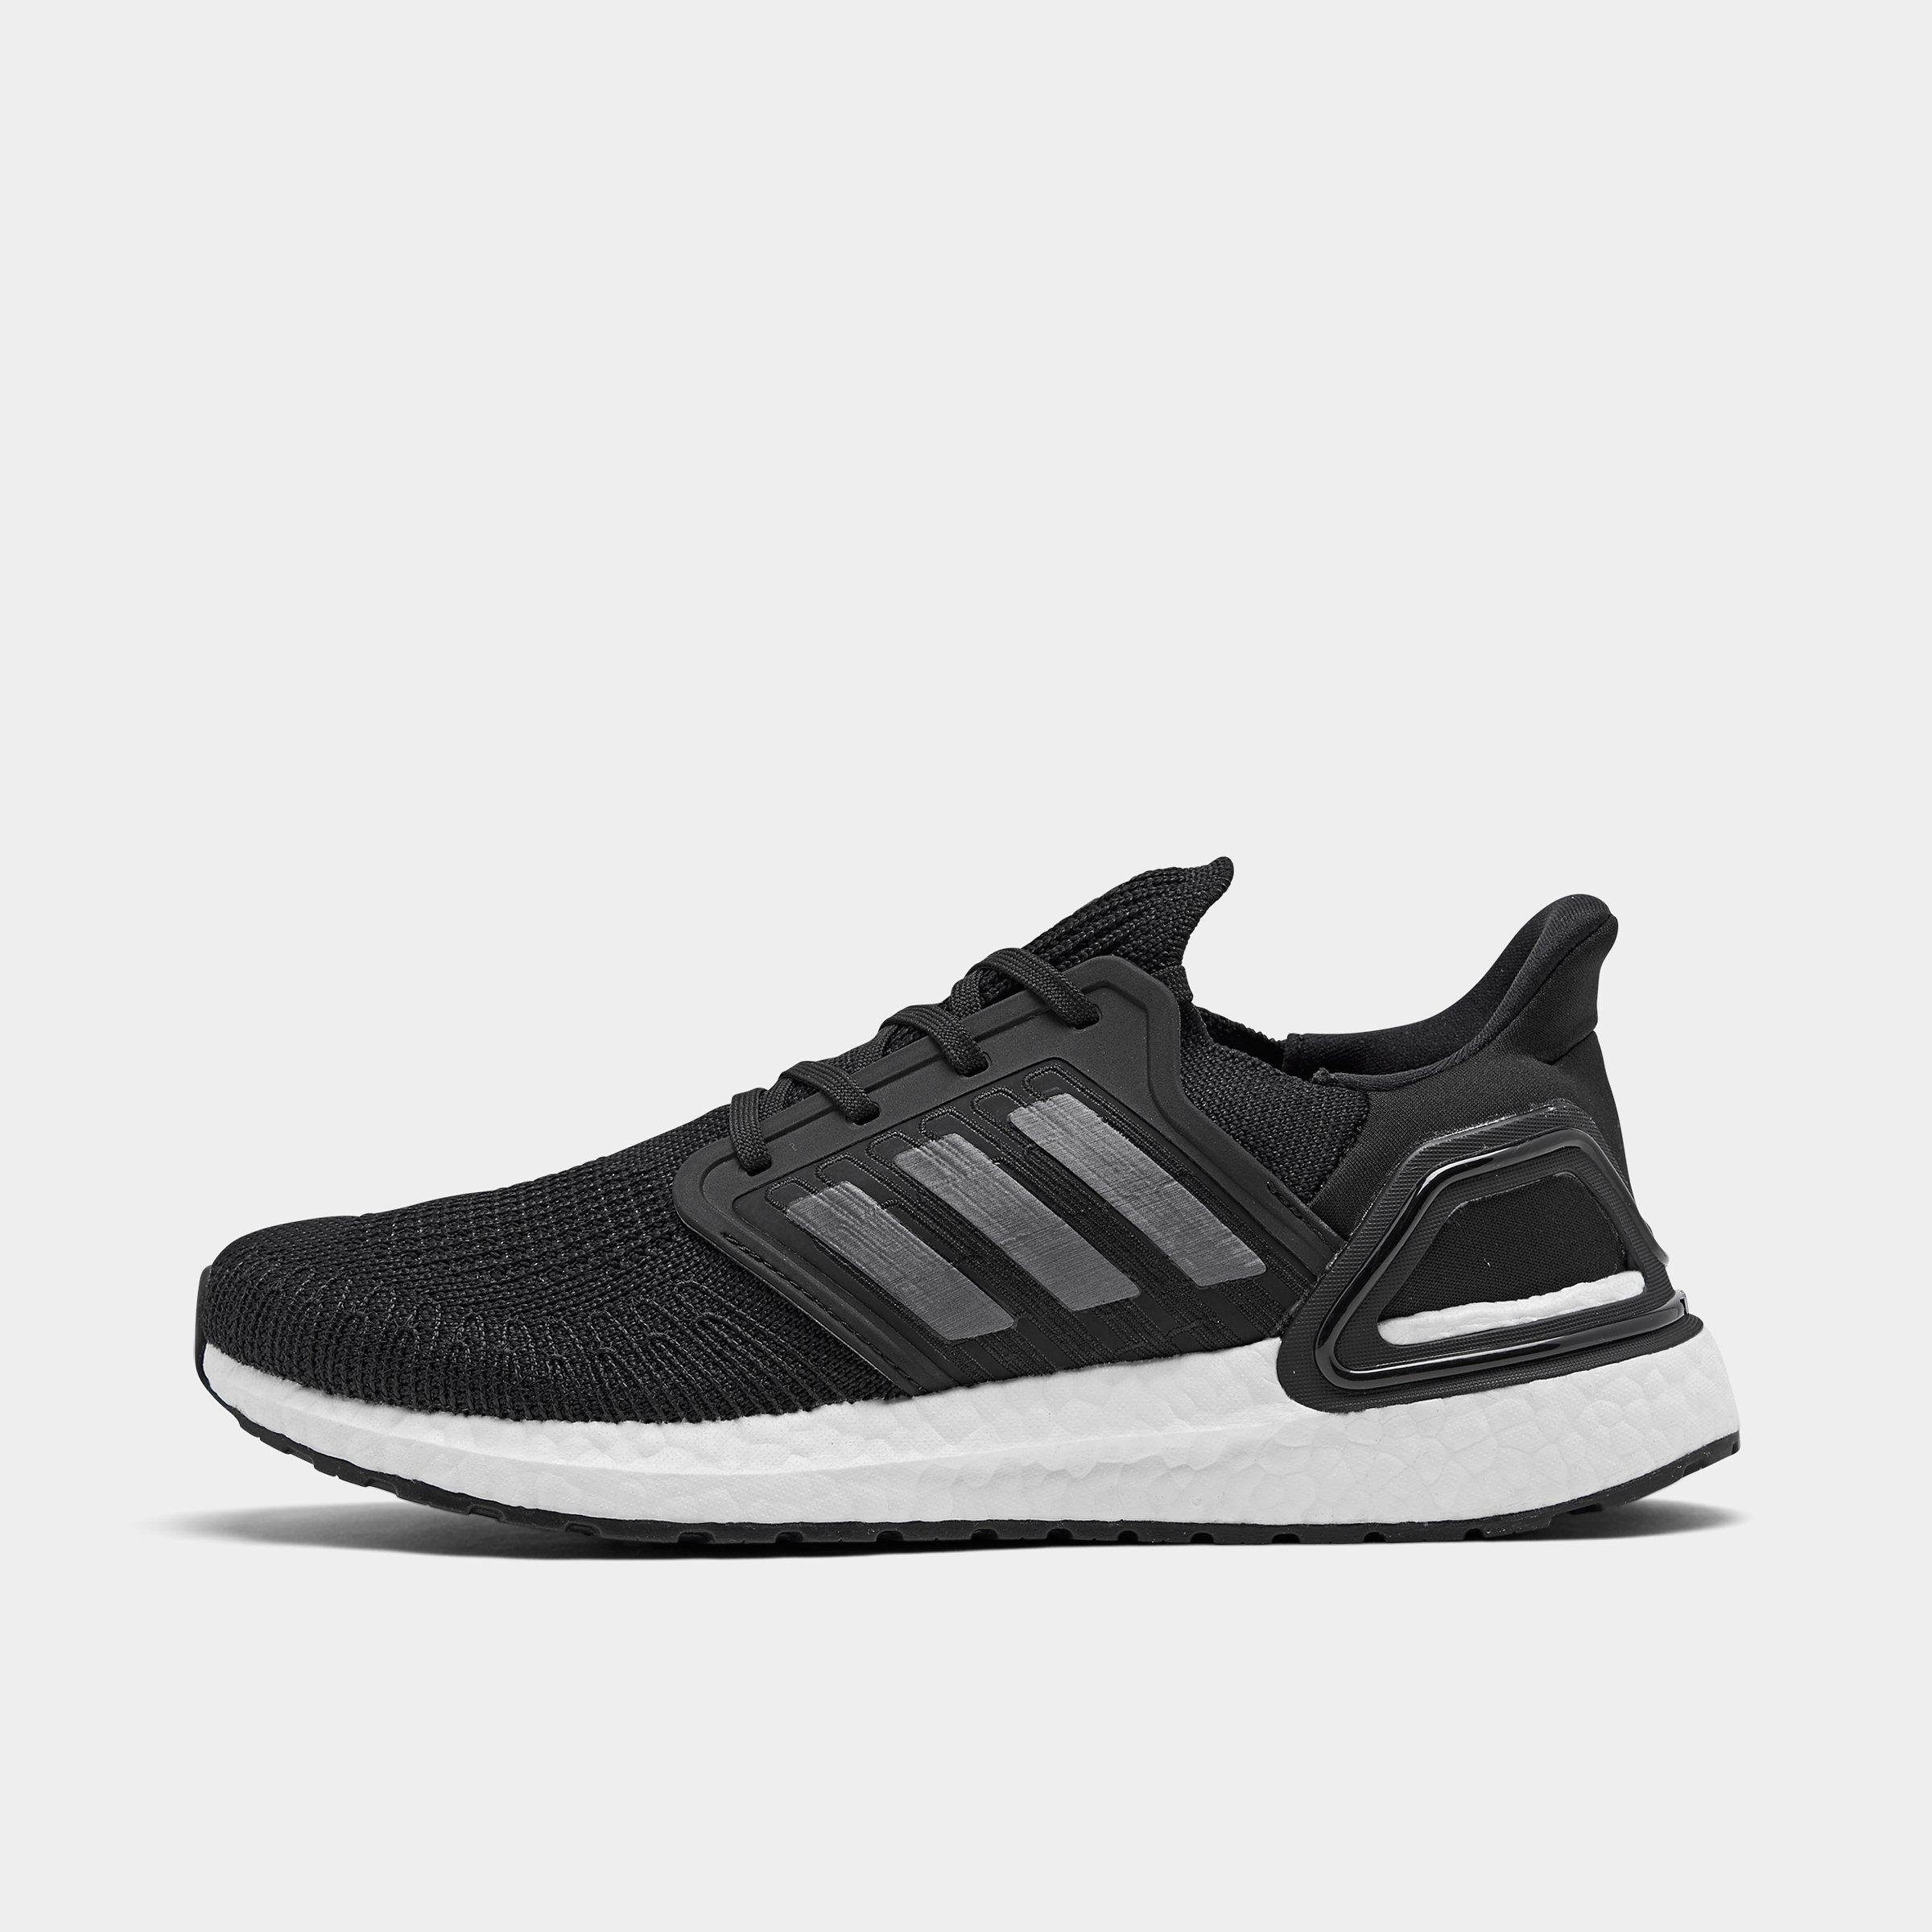 nmd ultra boost buy cheap new